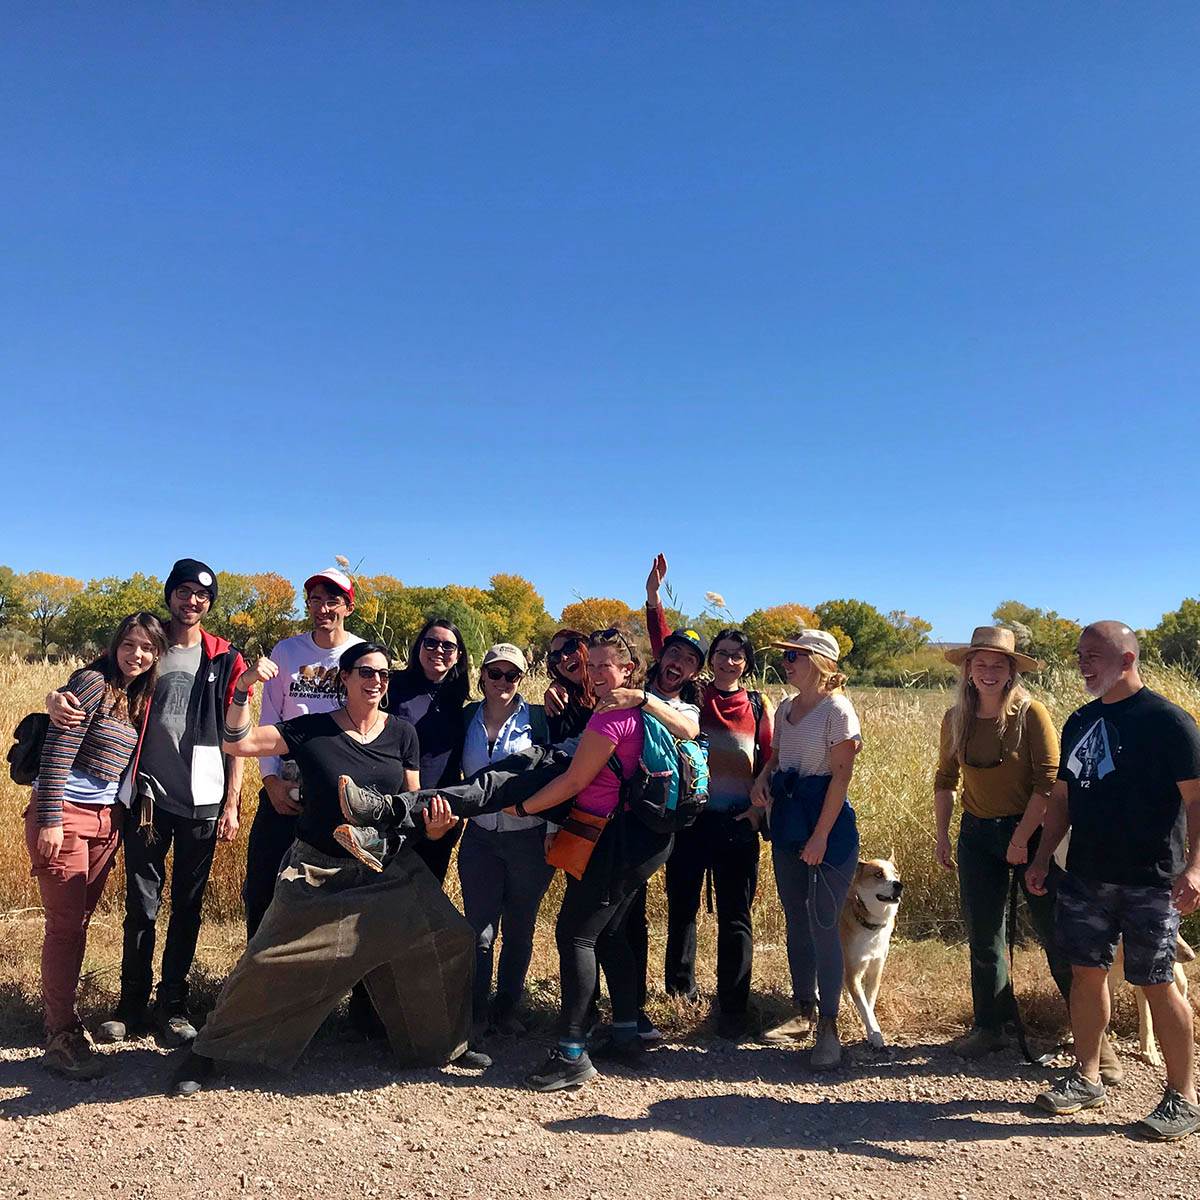 13 students pose in front of a grassy field with yellowing cottonwoods and clear blue sky behind them